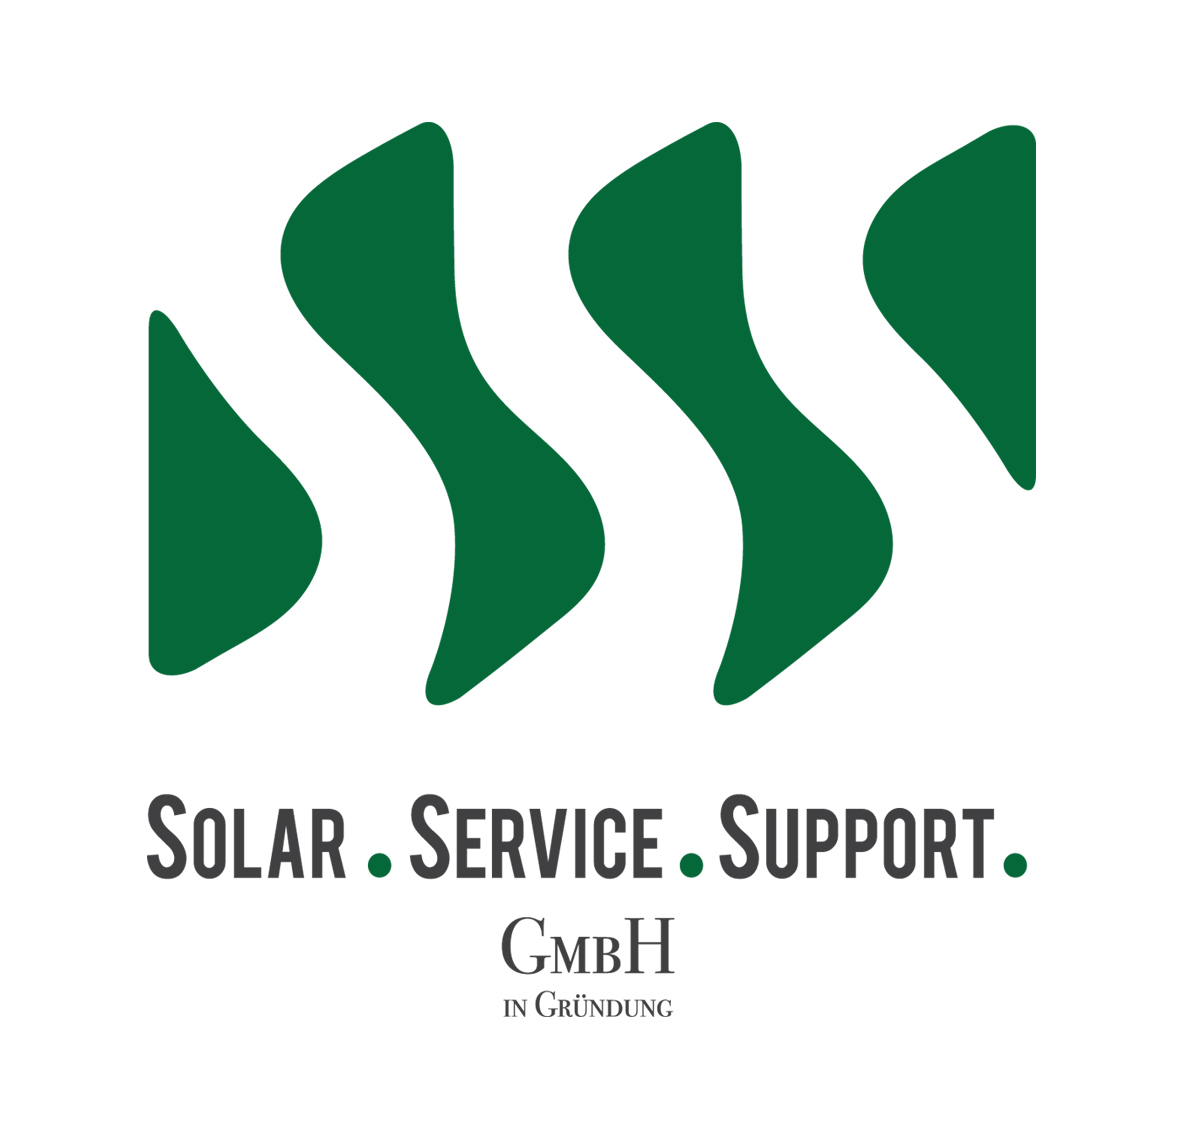 SOLAR . SERVICE . SUPPORT .